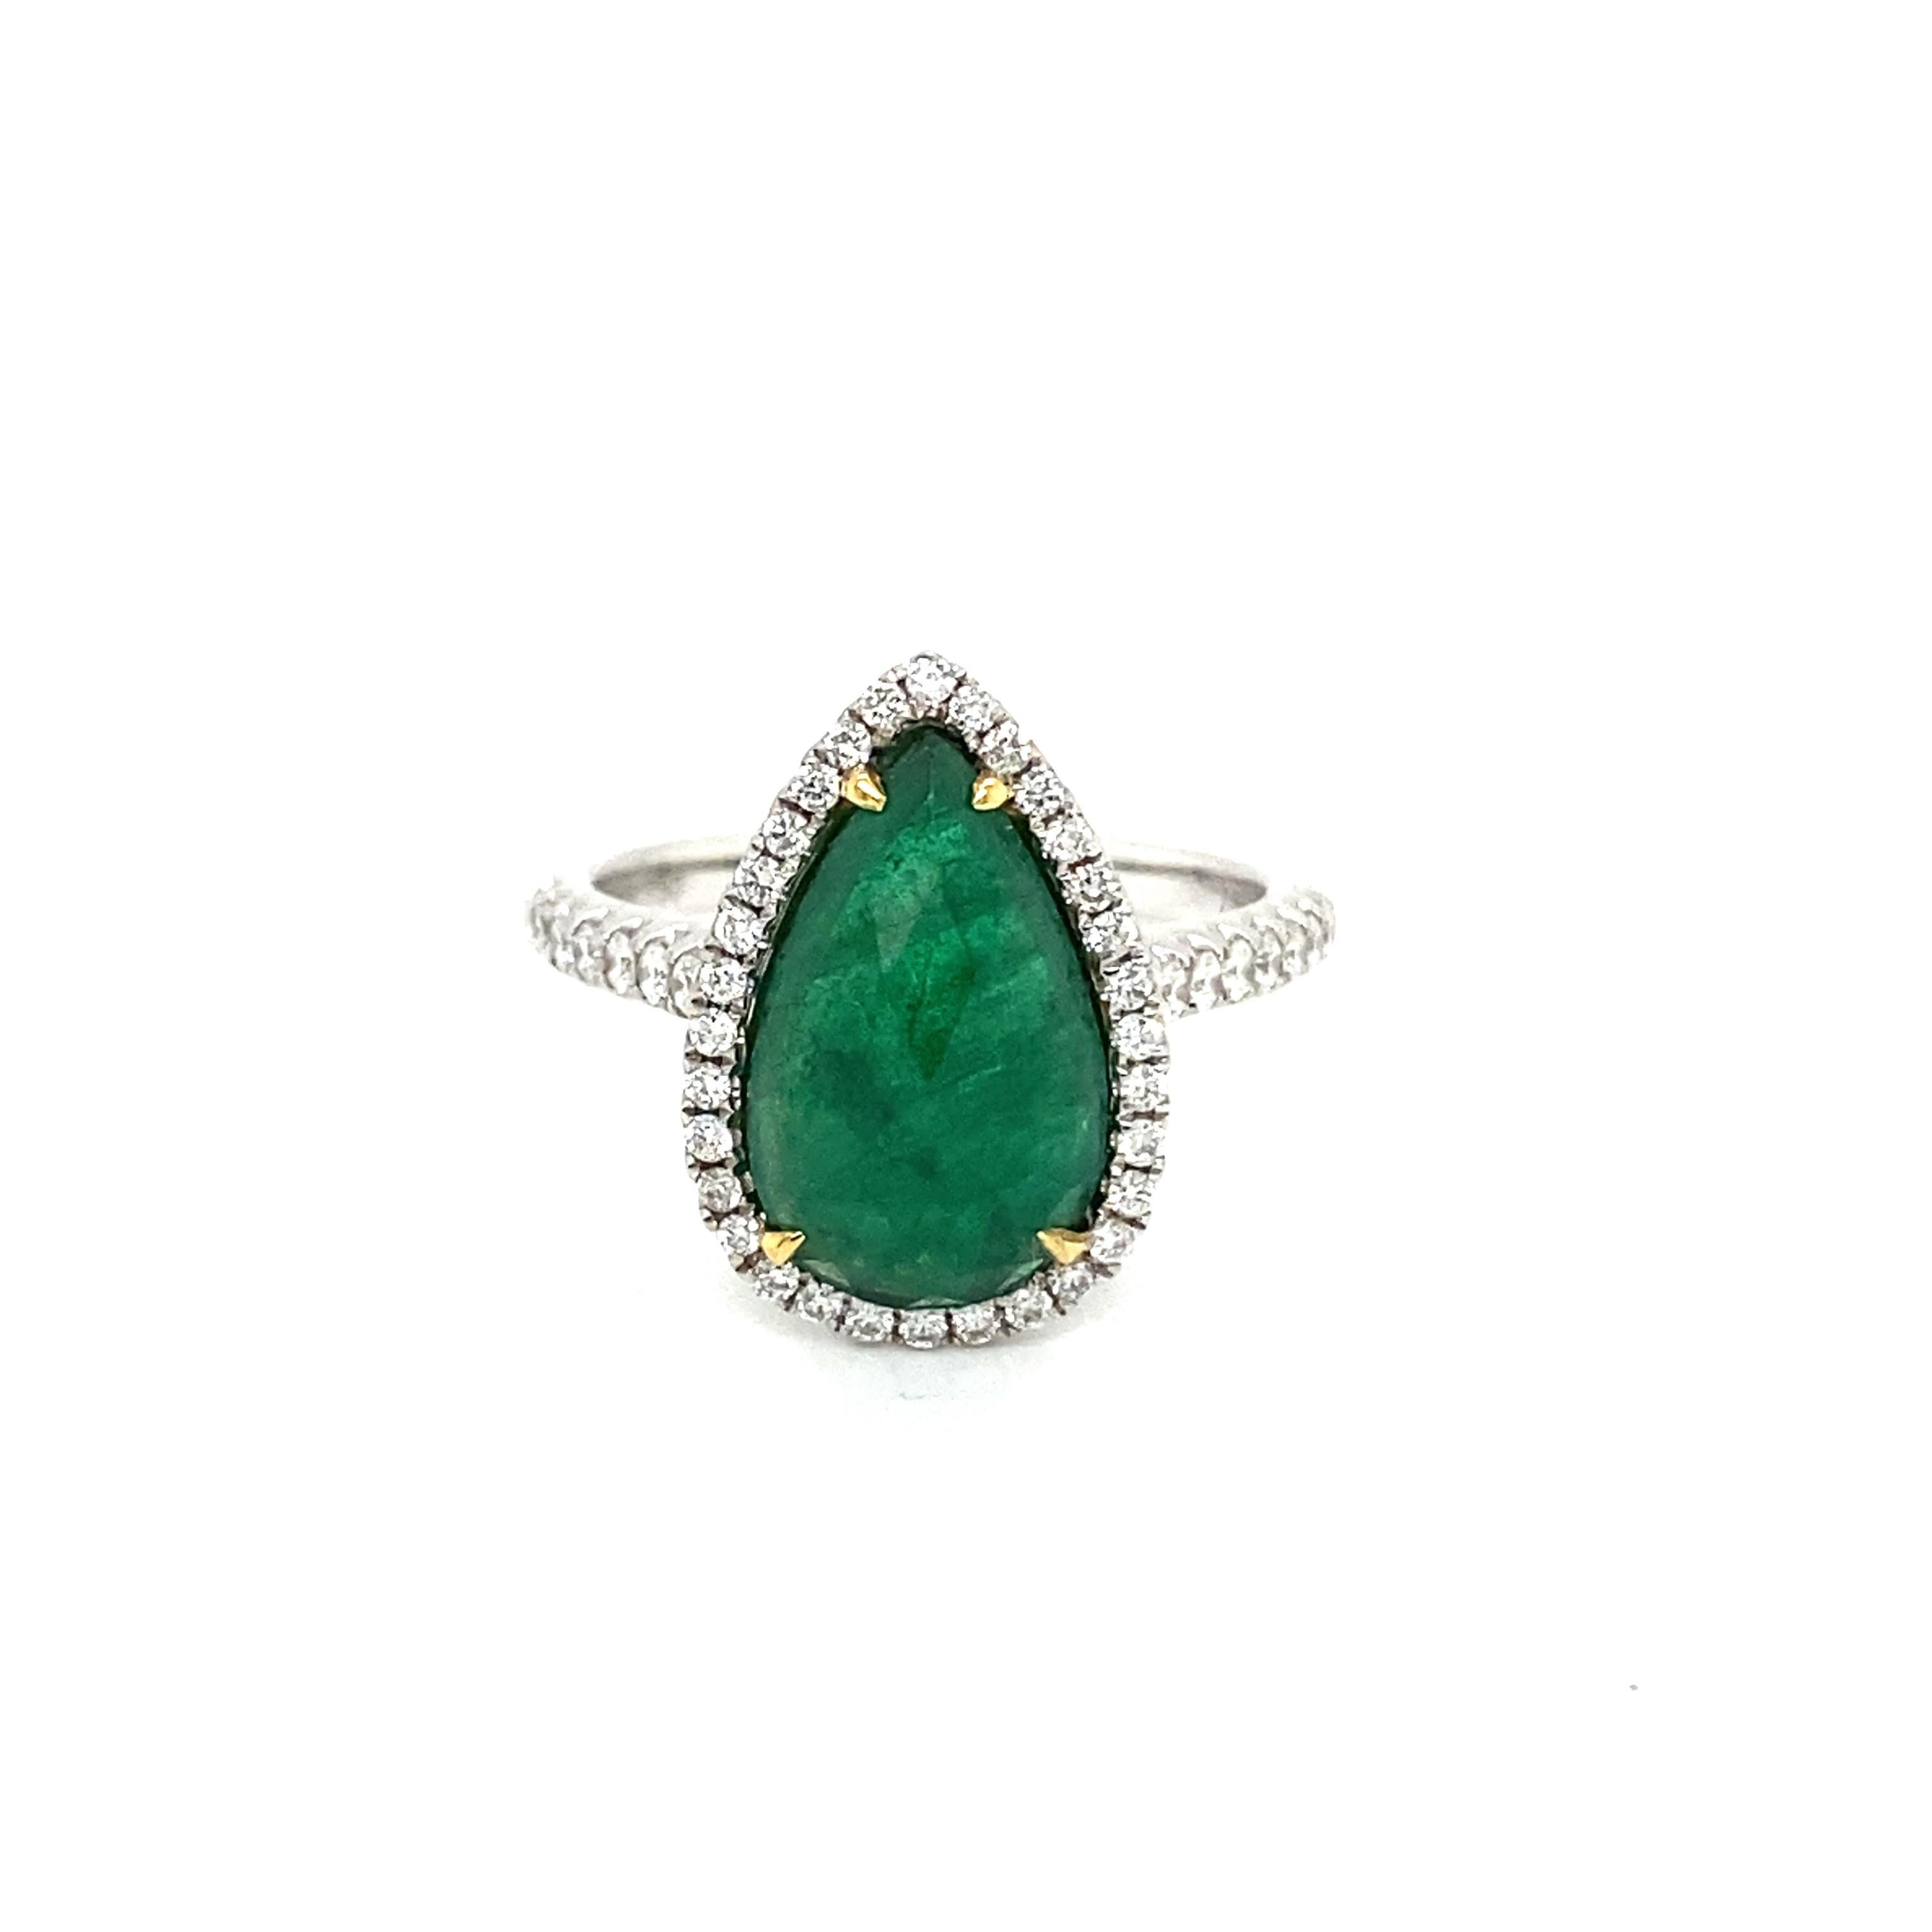 This stunning cocktail ring features a beautiful 2.82 Carat Pear Shape Emerald with a Diamond Halo on a Diamond Shank. This ring is set in 18k White Gold with 18k Yellow Gold Prongs on the center stone. 
Total Diamond Weight = 0.38 Carats. Ring Size